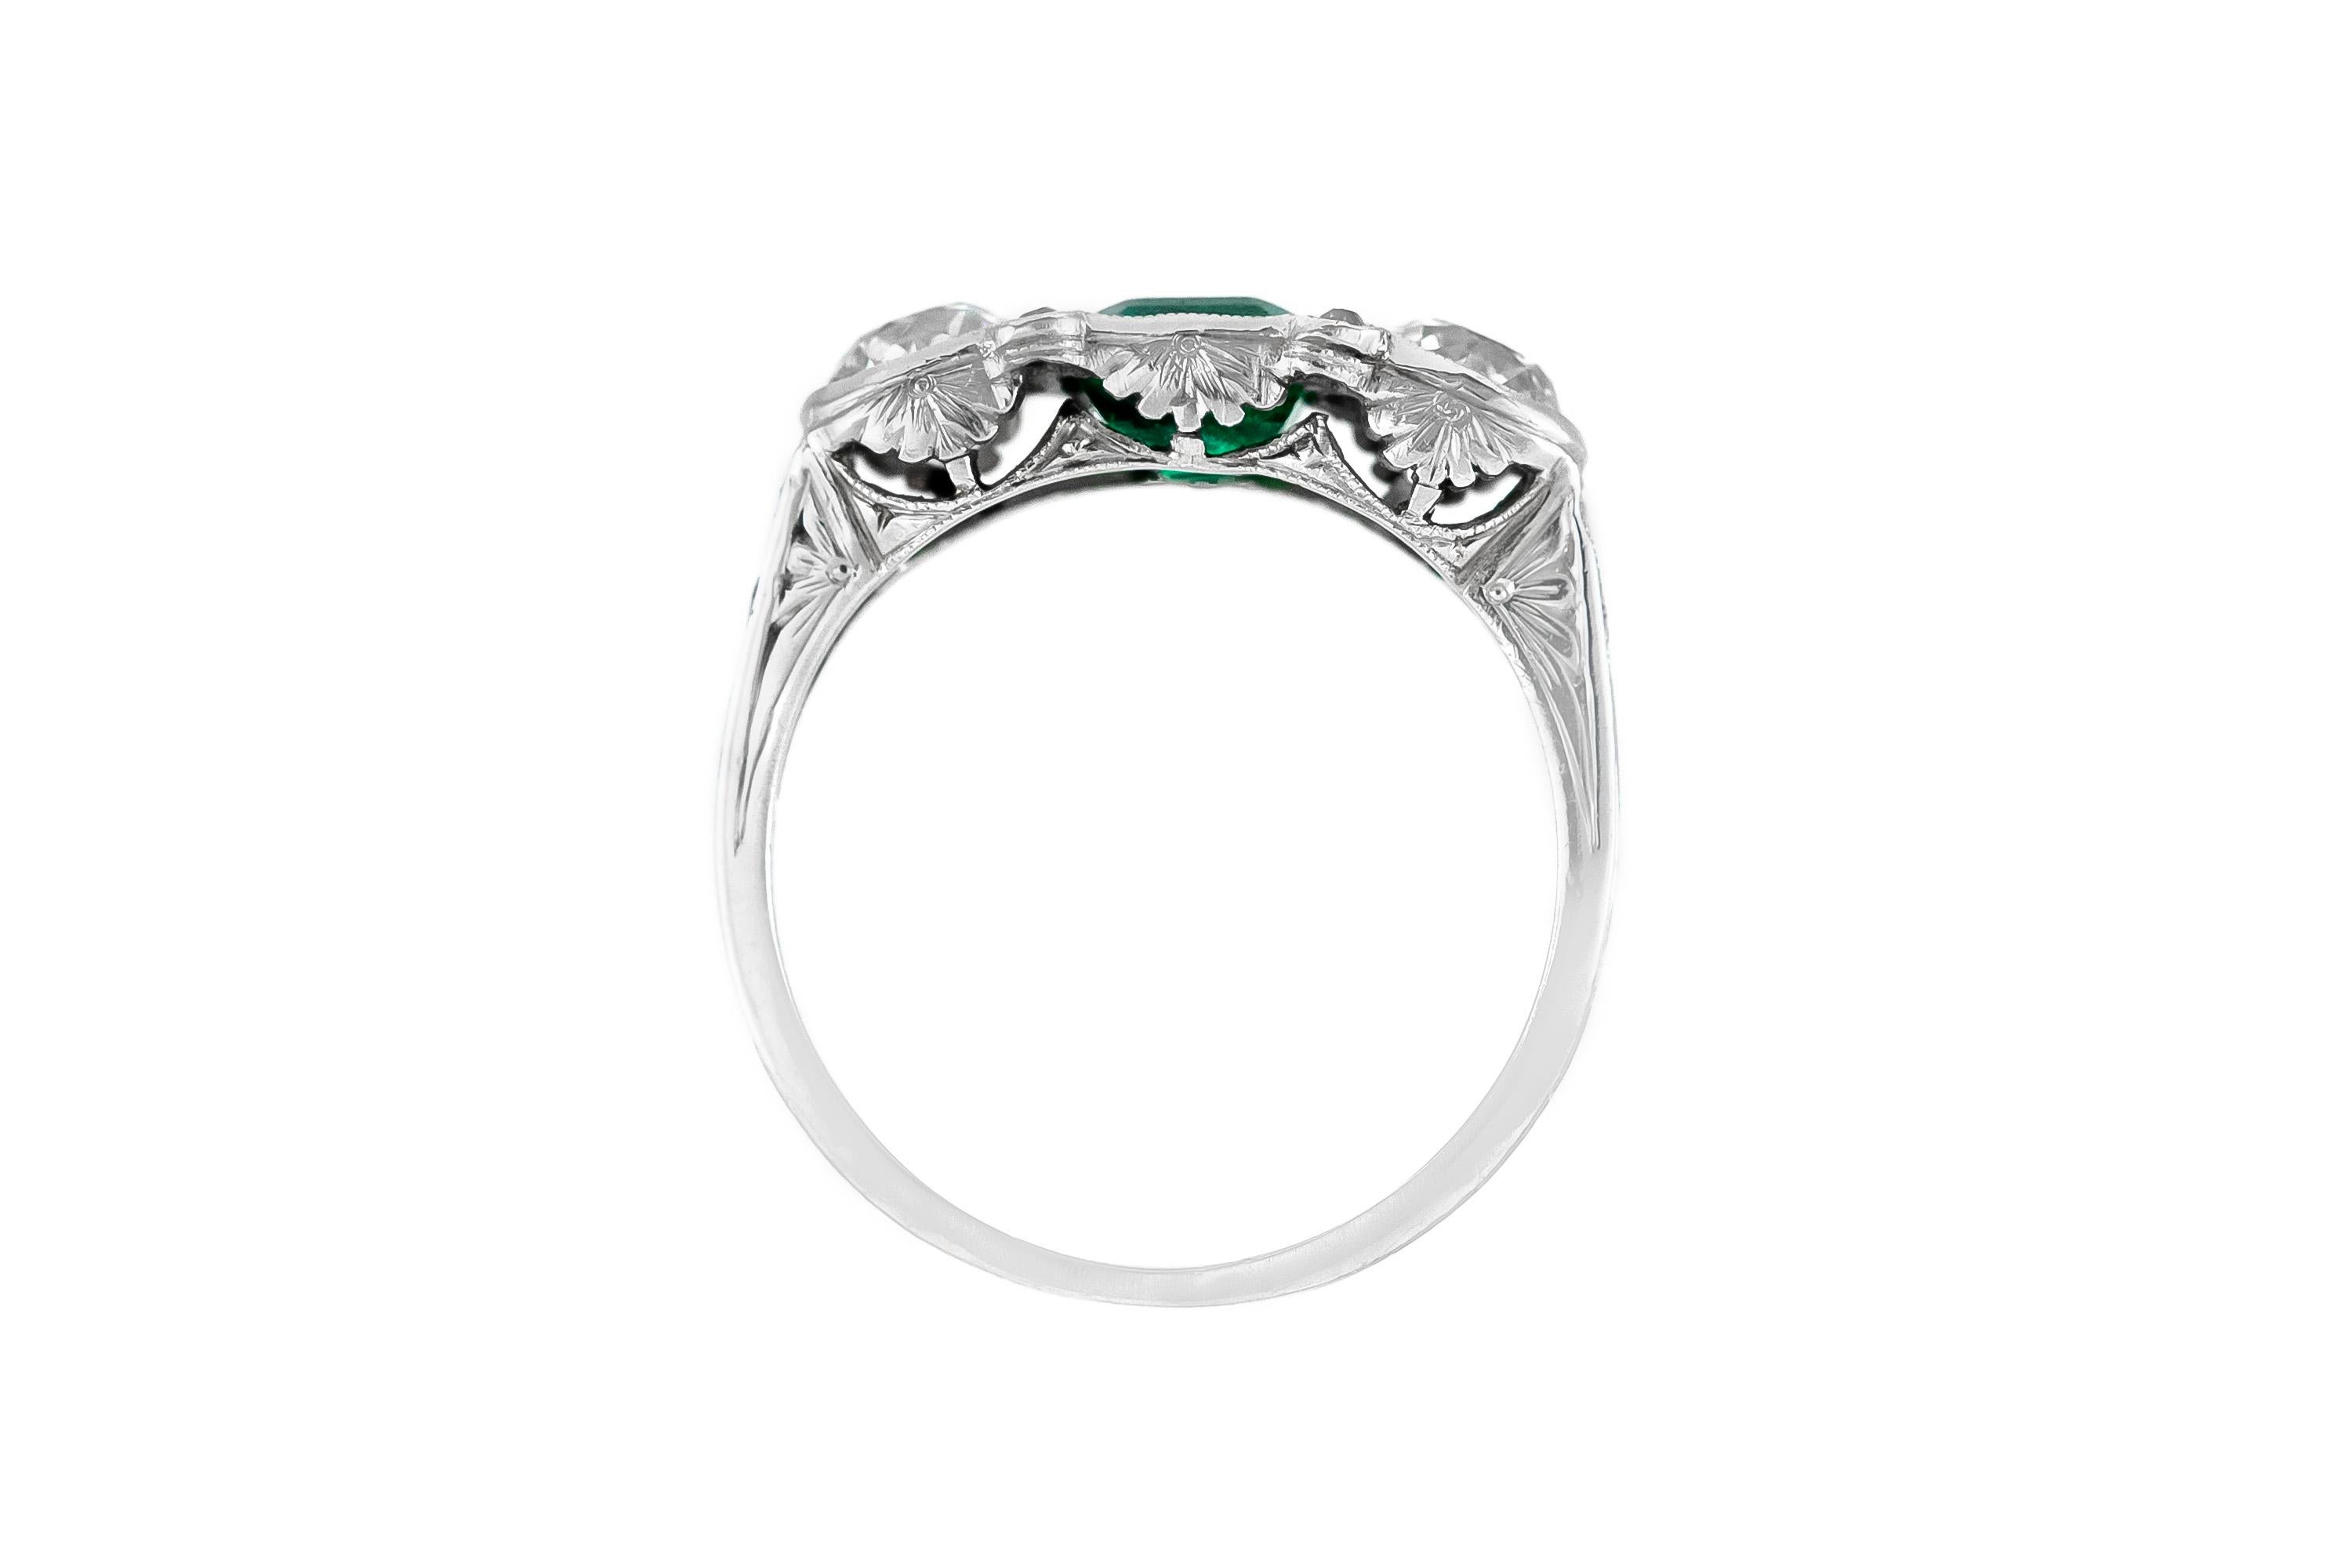 The ring is finely craftedin platinum with center emerald weighing approximately total of 0.80 and diamonds weighing approximately total of 1.20 carat.
Circa 1920.